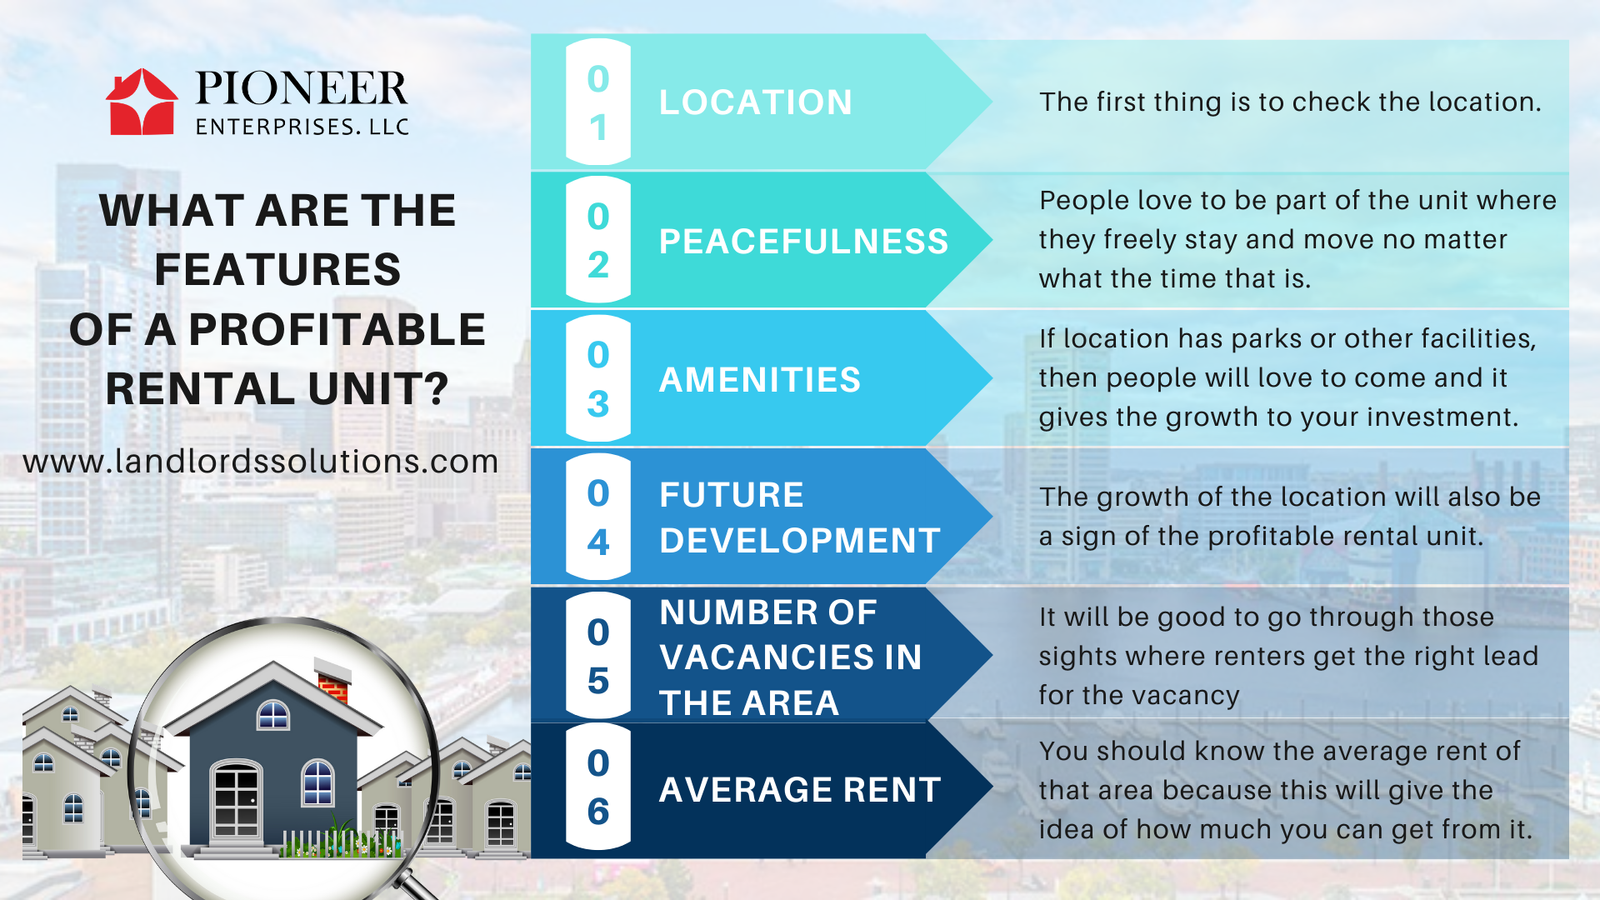 What are the features of a profitable rental unit?